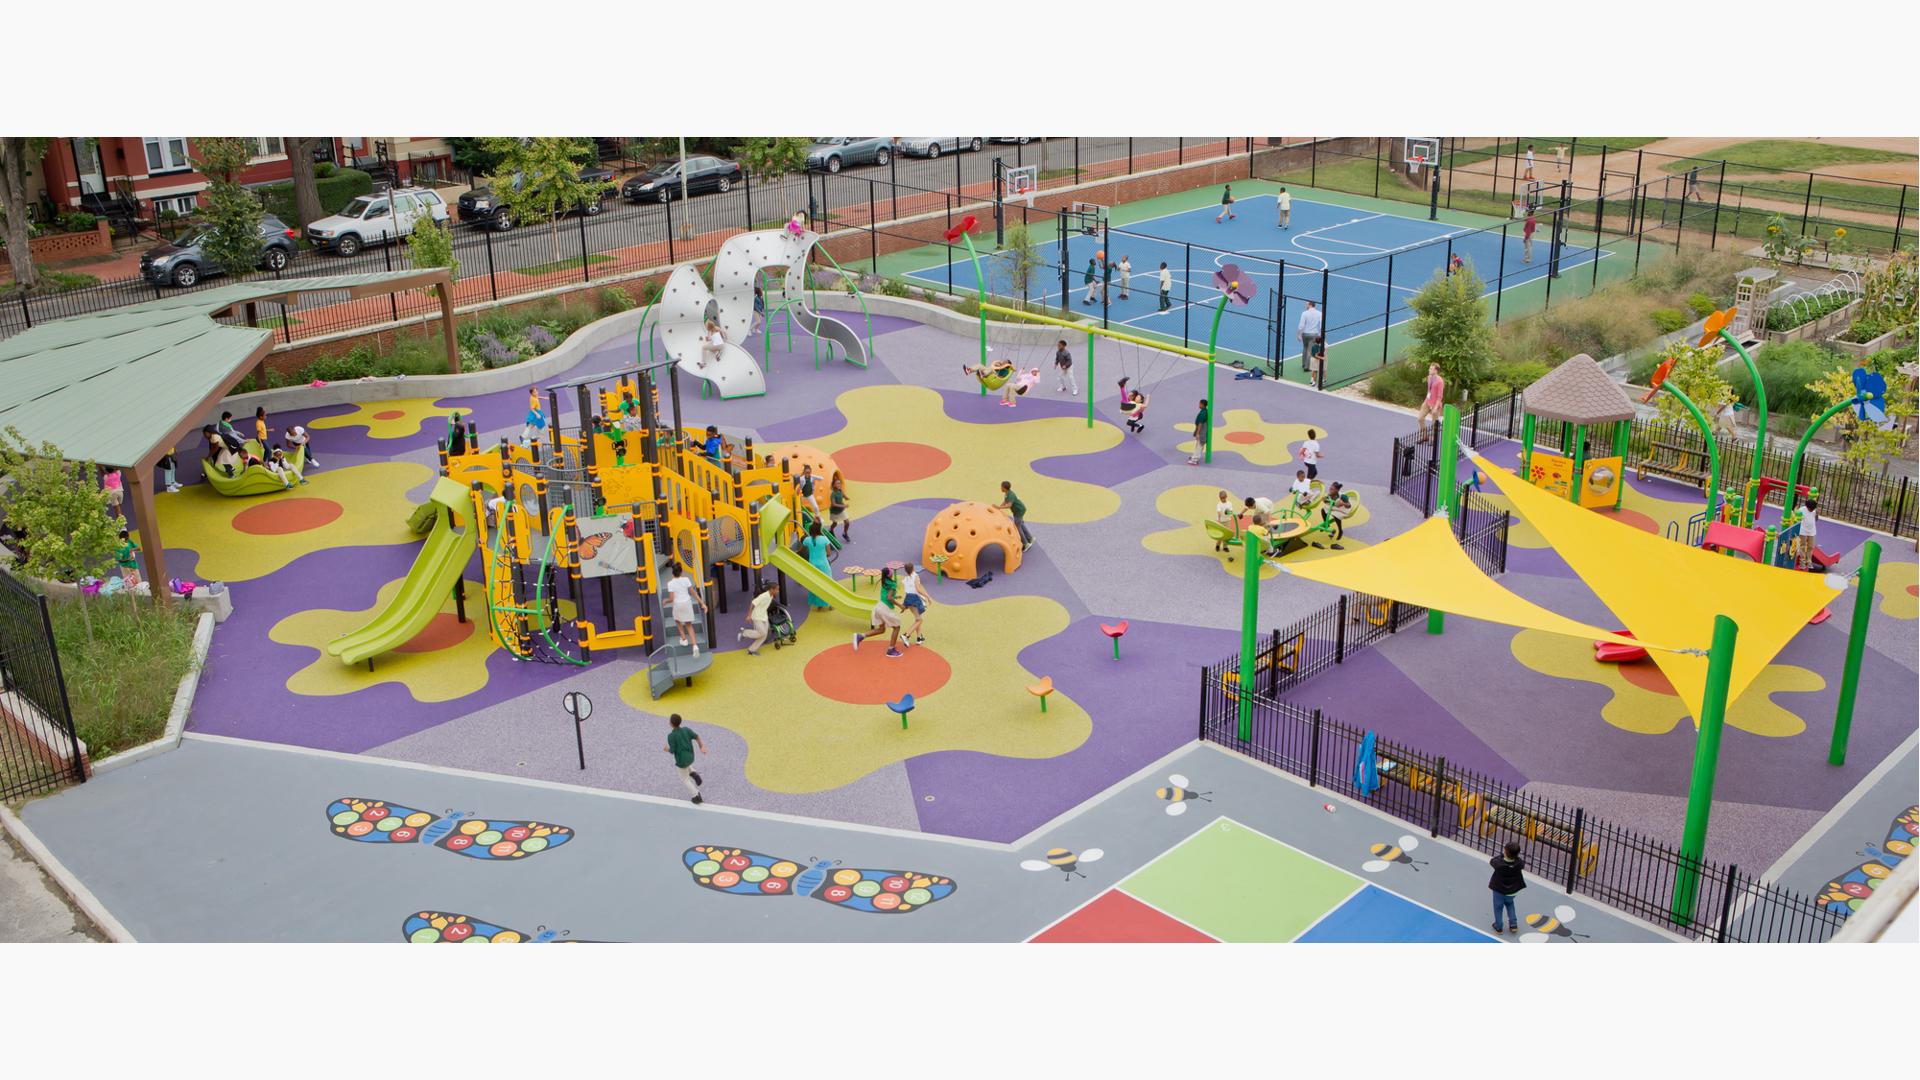 Ludlow Taylor Elementary School Washington, DC. A garden-themed playground features Two PlayBooster® playstructures for ages 2 to 5 and 5 to 12, DigiFuse®, Permalene®. Plus, flower-themed pod steppers and post toppers.
